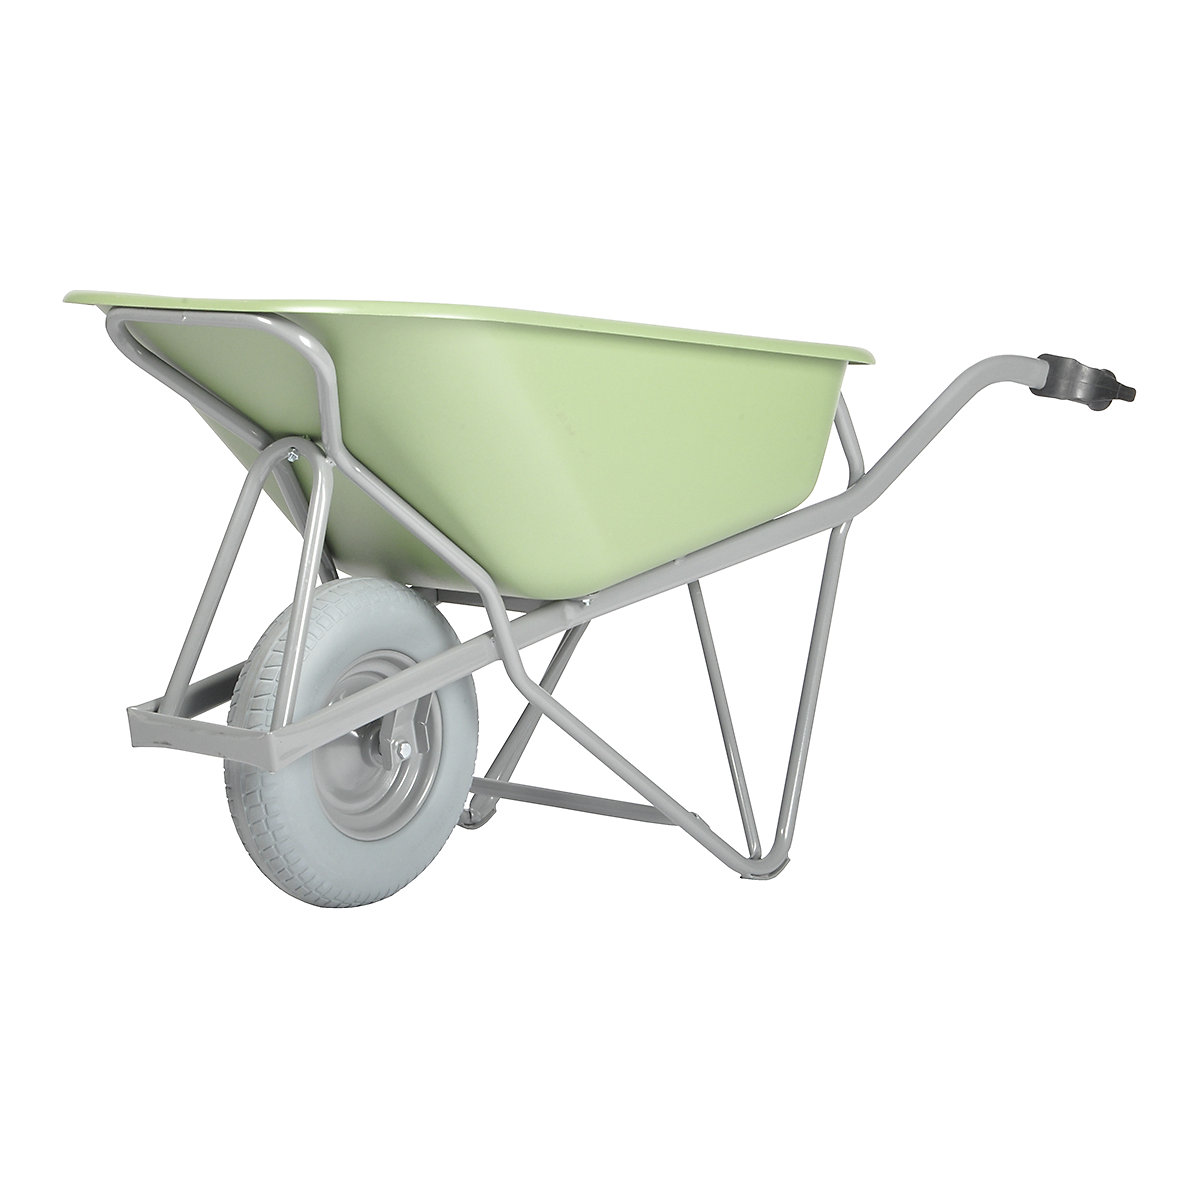 Profi-Max Plus wheel barrow – MATADOR, made of steel, 90 l, HDPE tray, green, puncture proof tyres, 2+ items-2